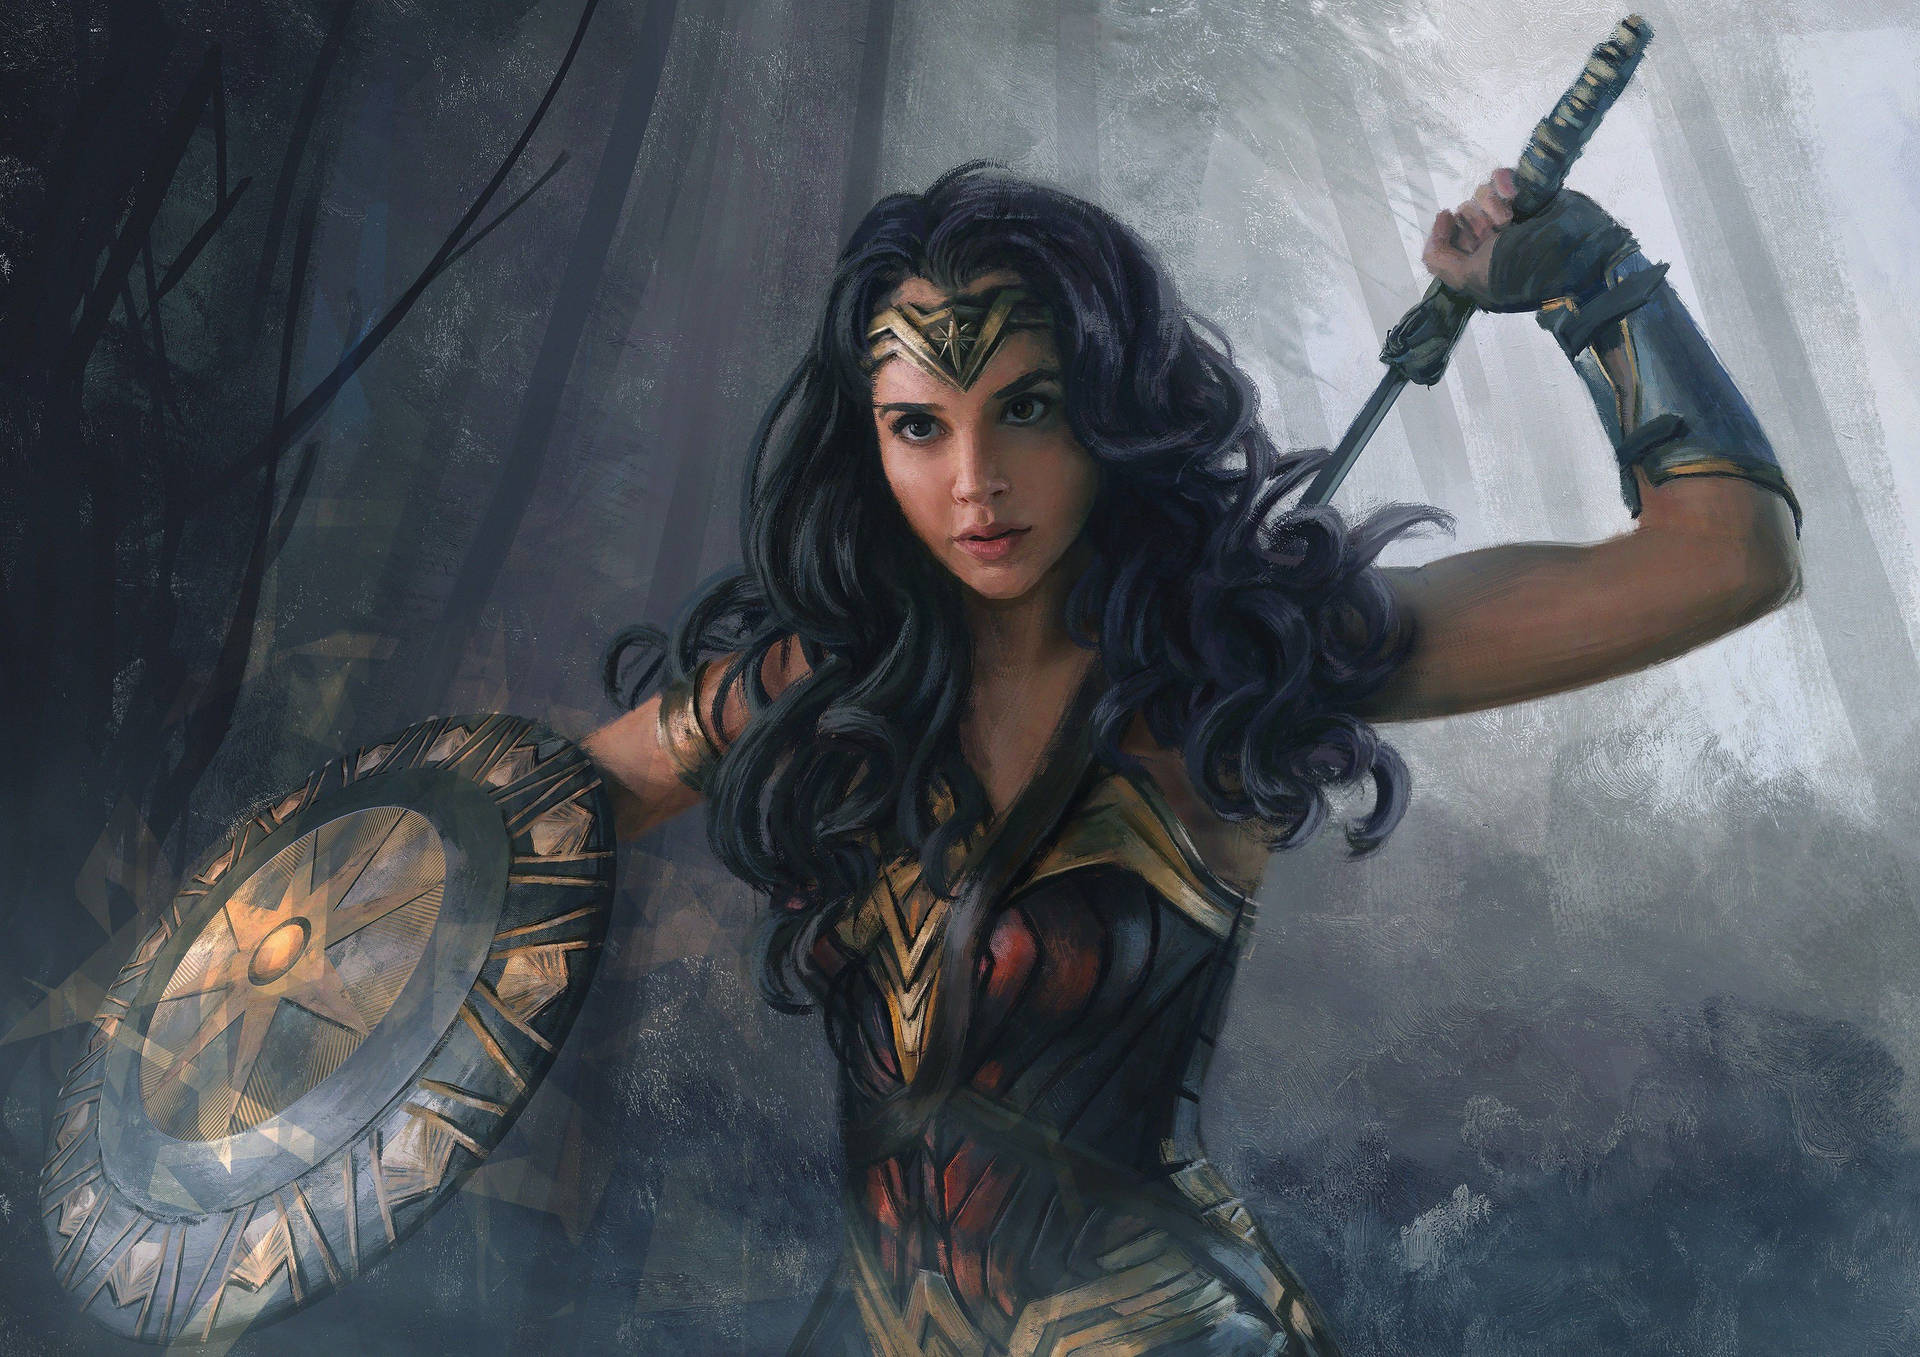 Wonder Woman Enjoys The Beauty Of Nature In A Dark Forest Wallpaper